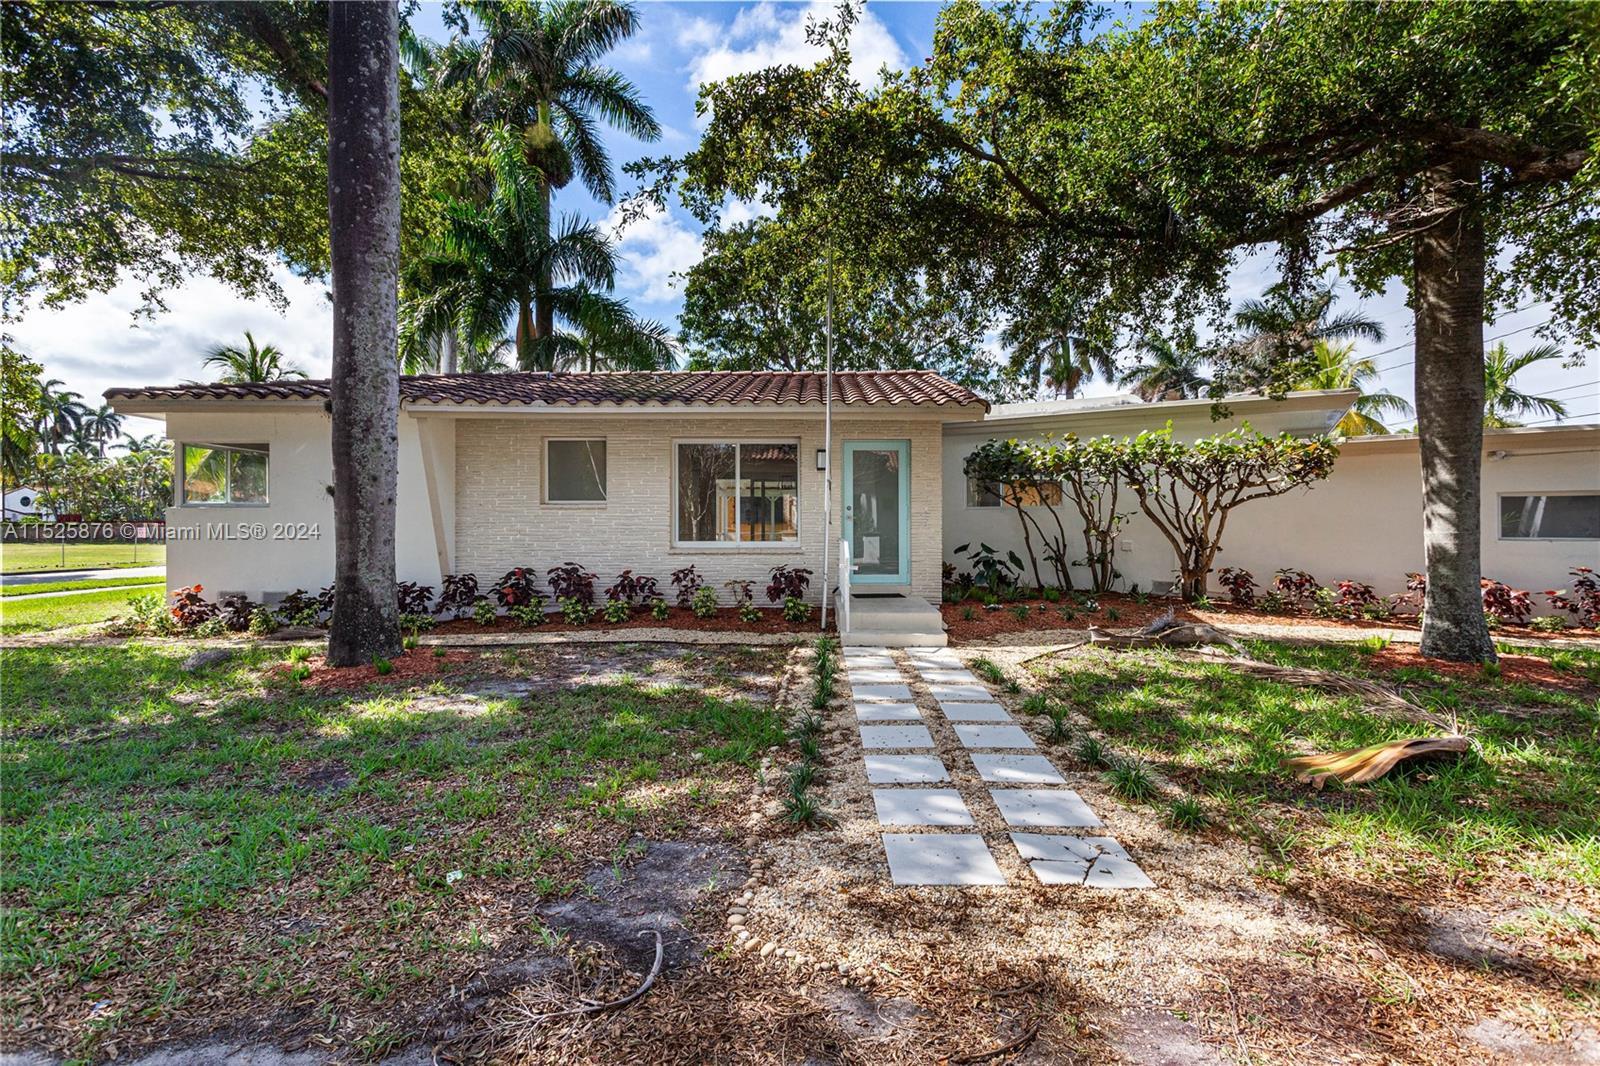 Photo of 300 N 13th Ave in Hollywood, FL